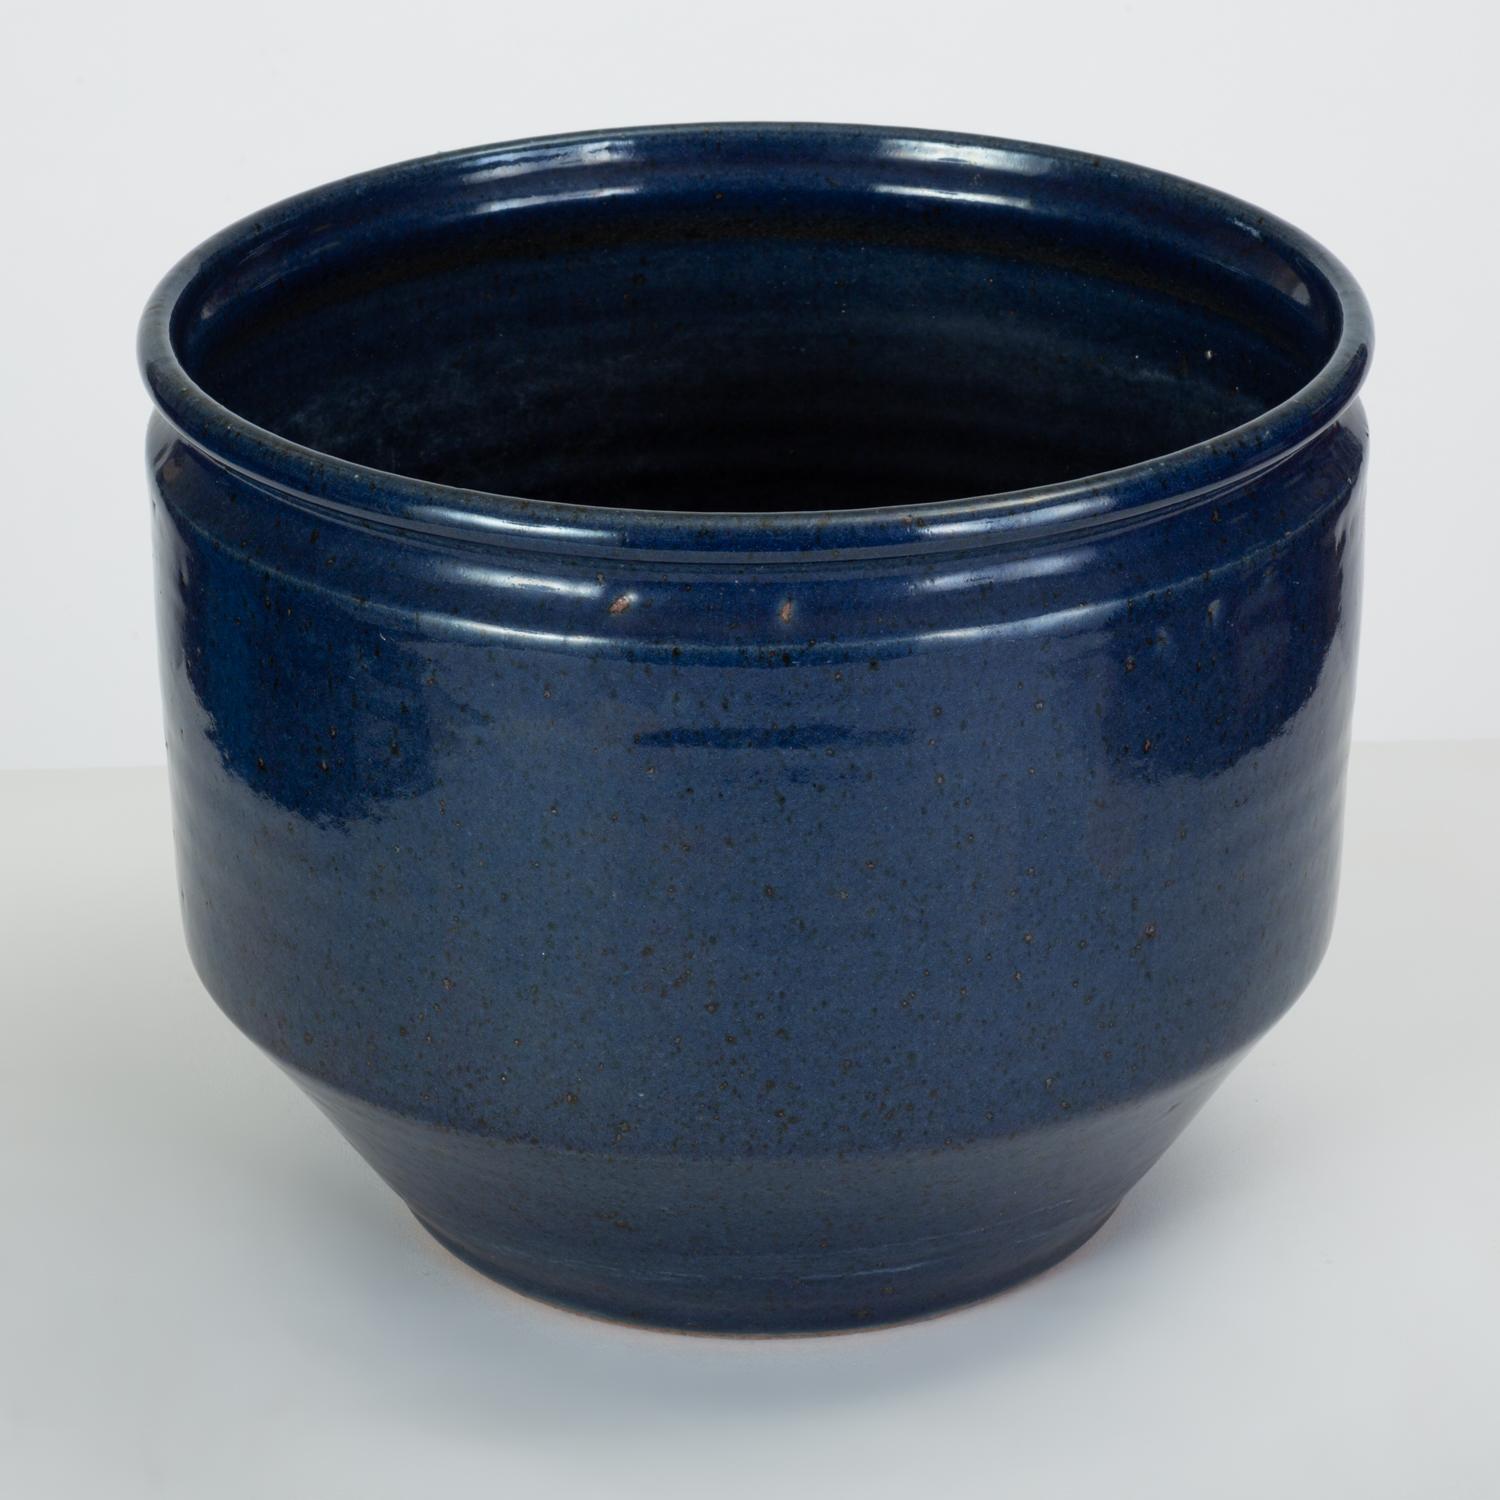 Pair of Blue-Glazed Earthgender Bowl Planters, David Cressey and Robert Maxwell 9